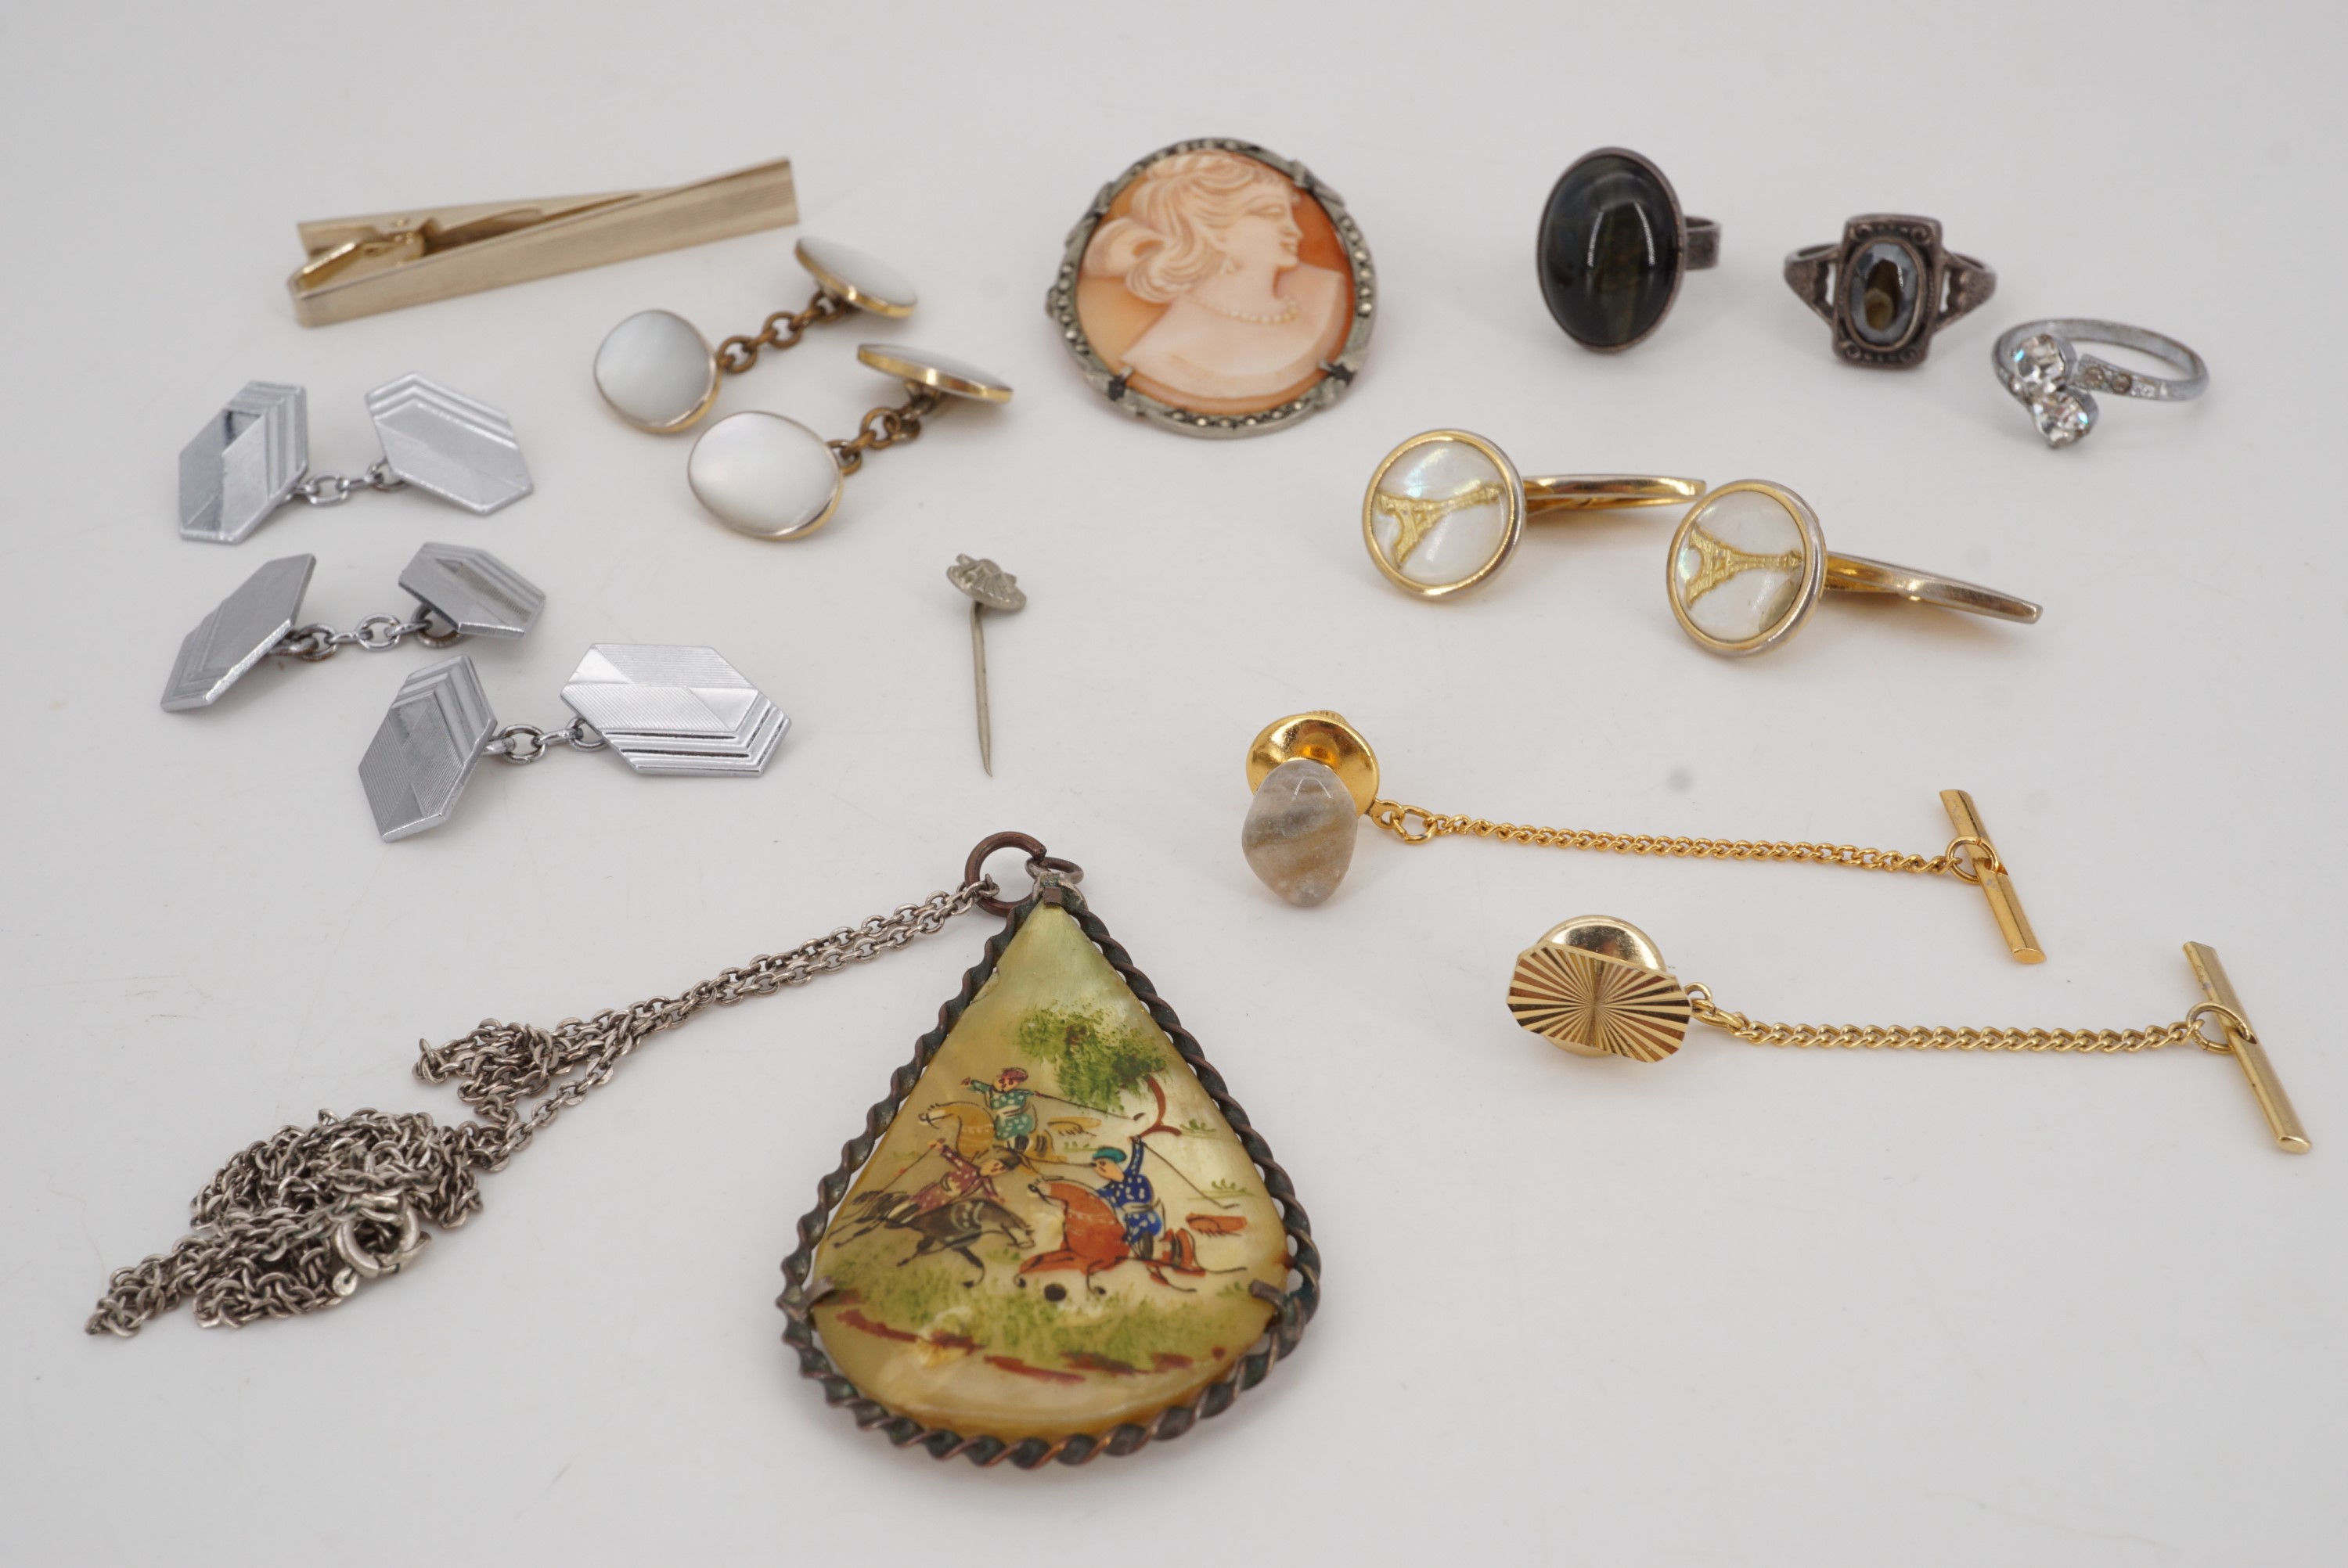 A small group of vintage costume jewellery including Art Deco and Eiffel Tower cuff links